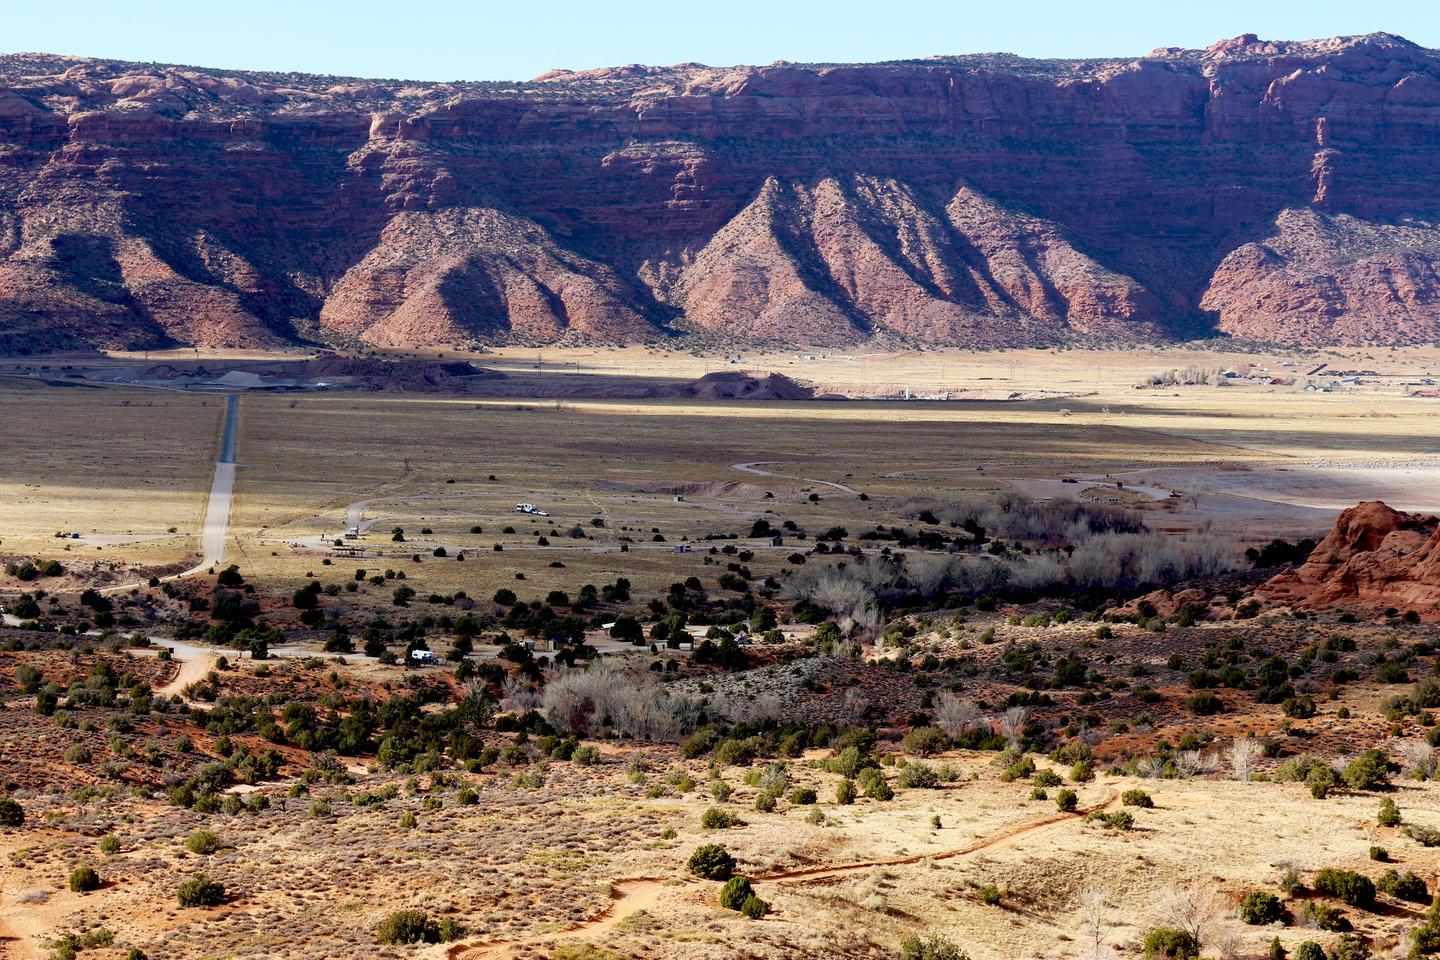 Overview of Ken's Lake Campground with red rock cliffs lining the horizon.